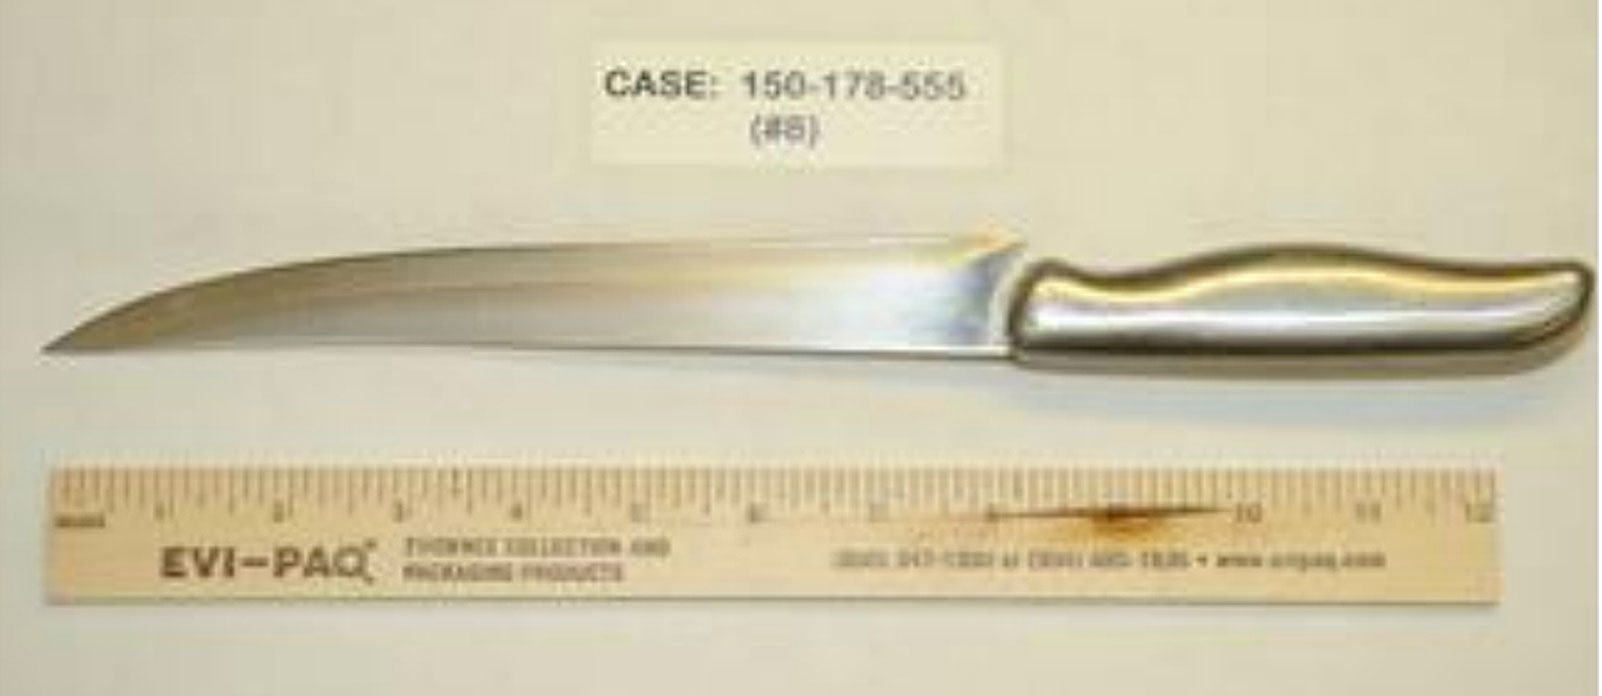 Knife recovered from the from the crime scene (13-inch with an 8-inch blade). Photo Courtesy: SF District Attorney’s Office